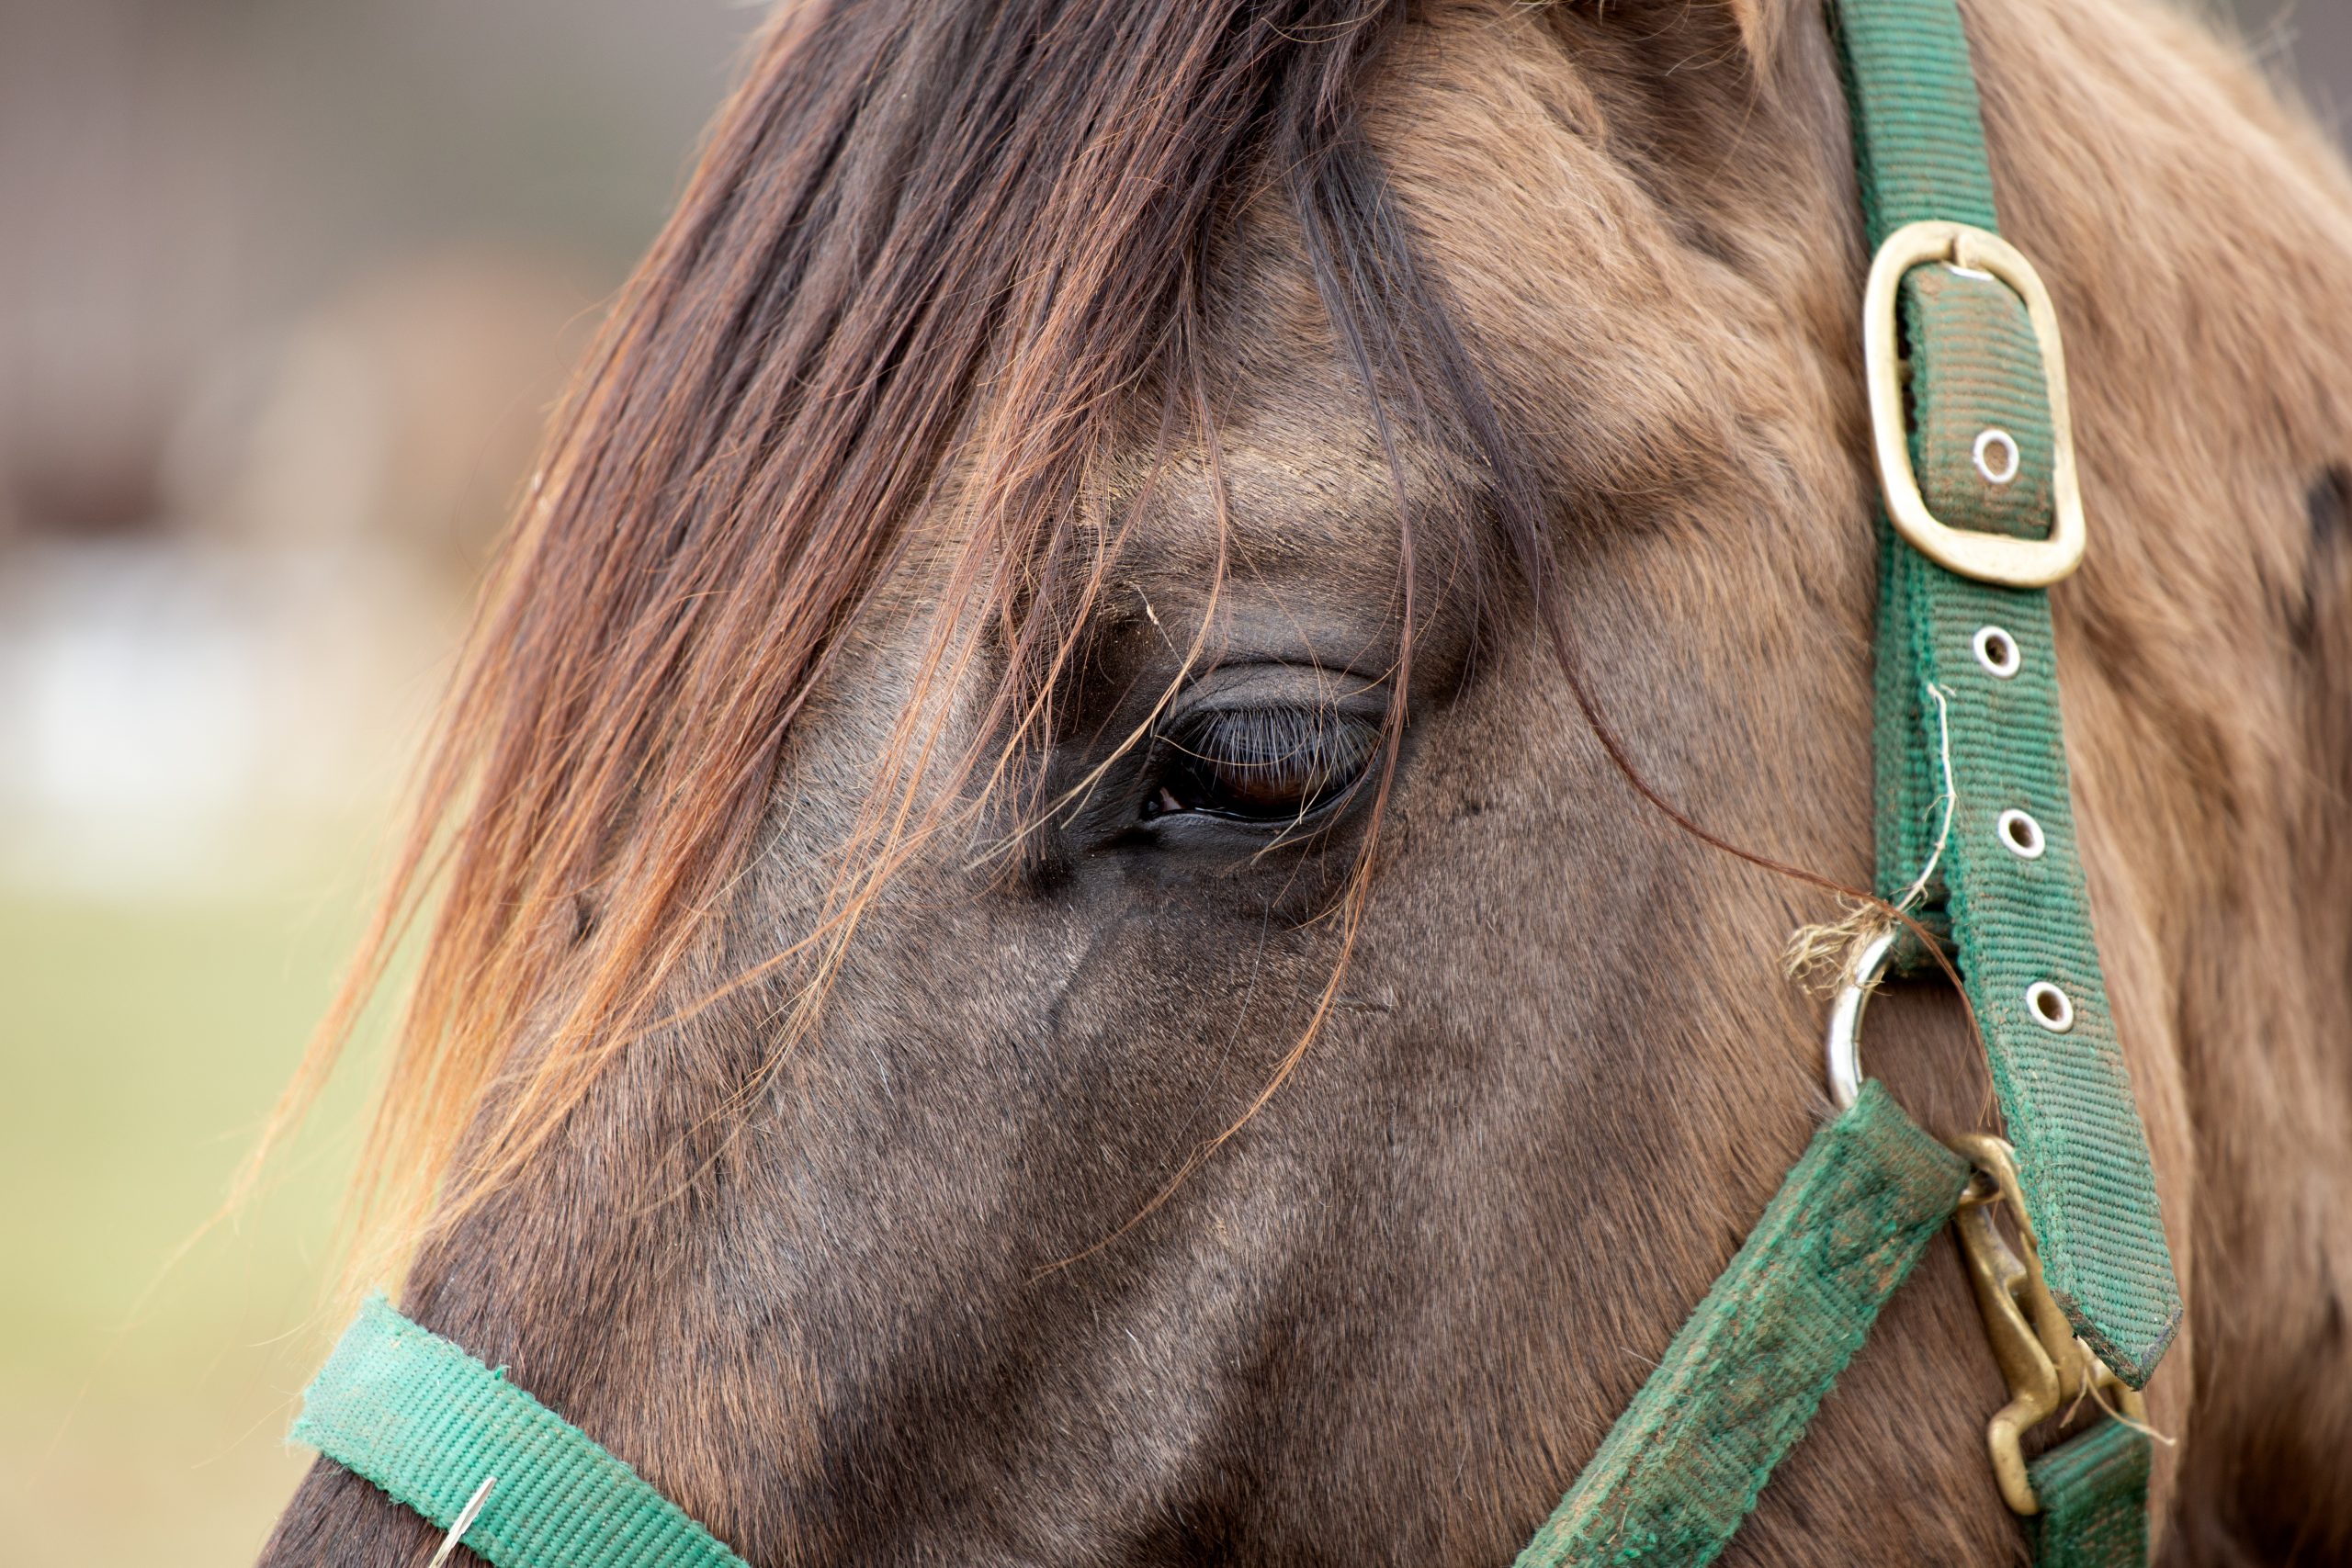 Ivermectin is good for horses, bad for COVID-19 patients.